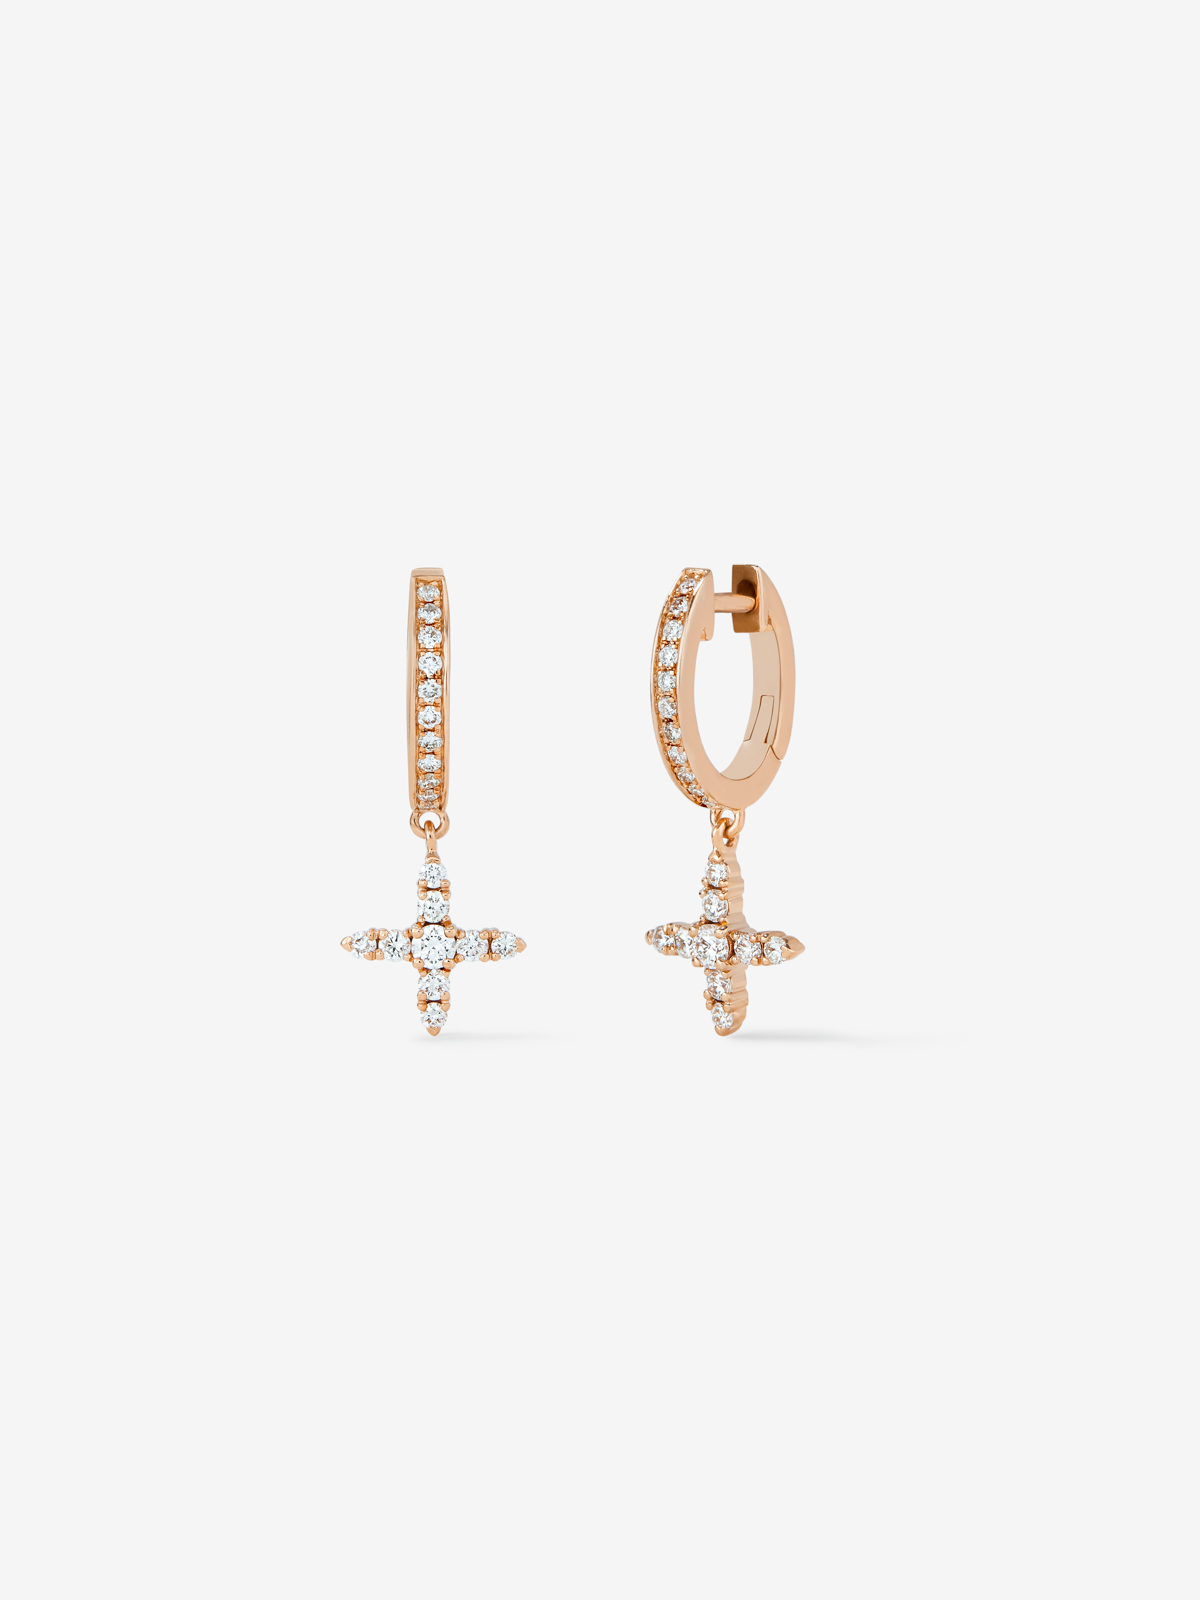 Individual hoop earring with hanging star in 18K rose gold with diamonds.